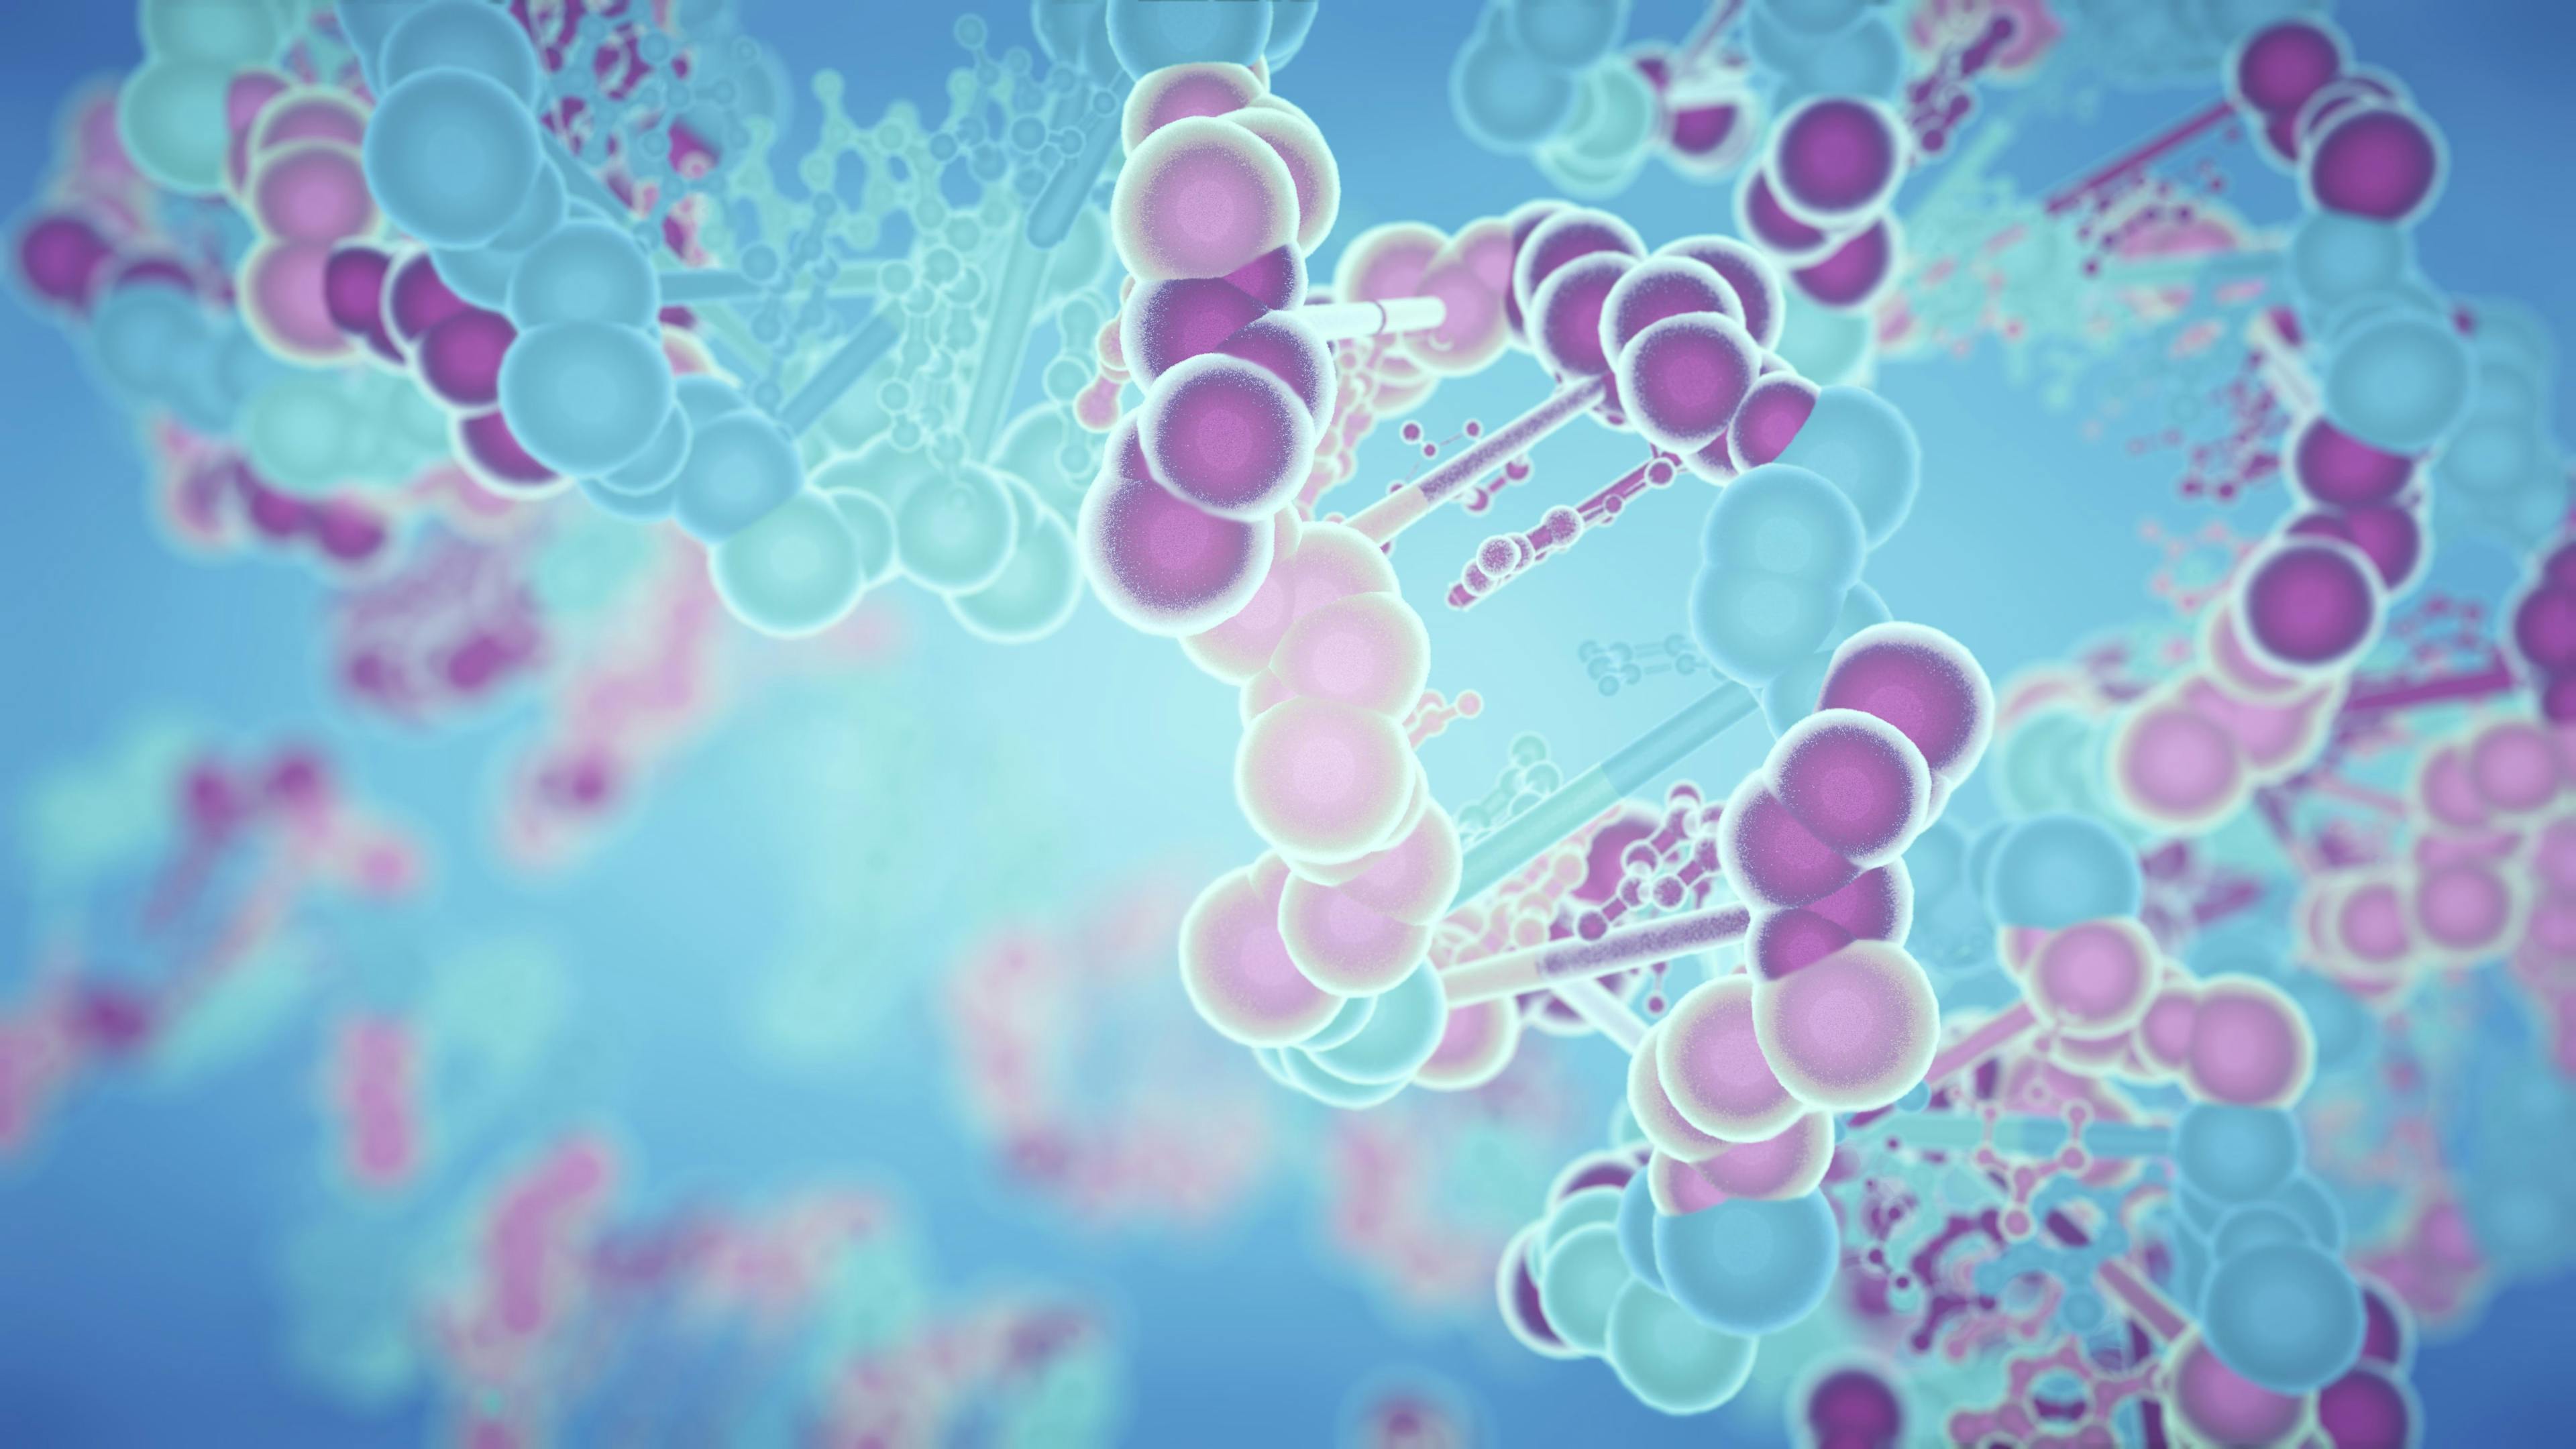 Zolgensma Gene Therapy Linked to 2 Deaths in SMA Patients, Novartis Reports 